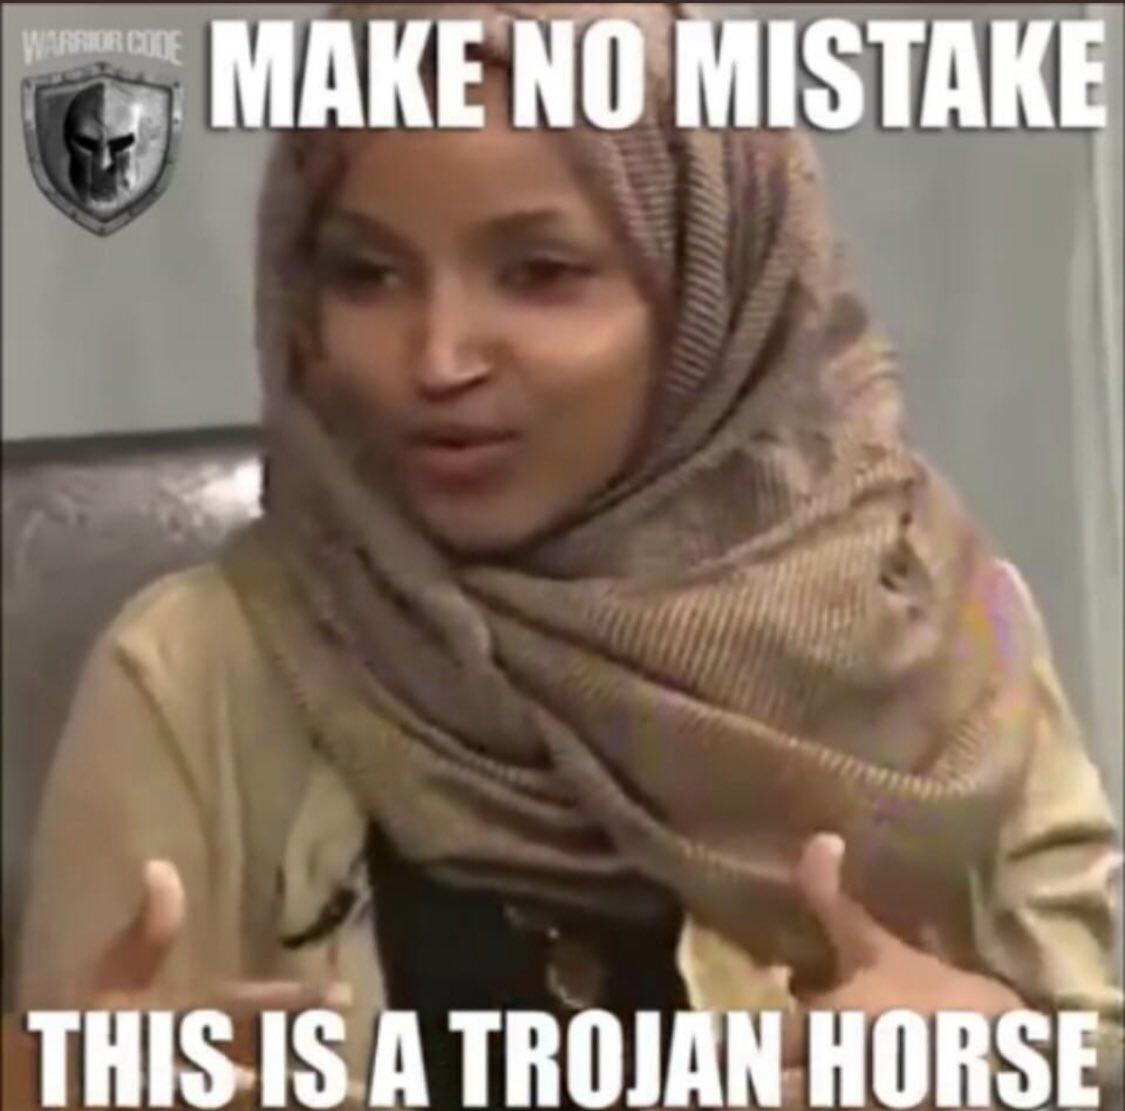 And now a lecture on ‘true patriotism’ from Ilhan Omar